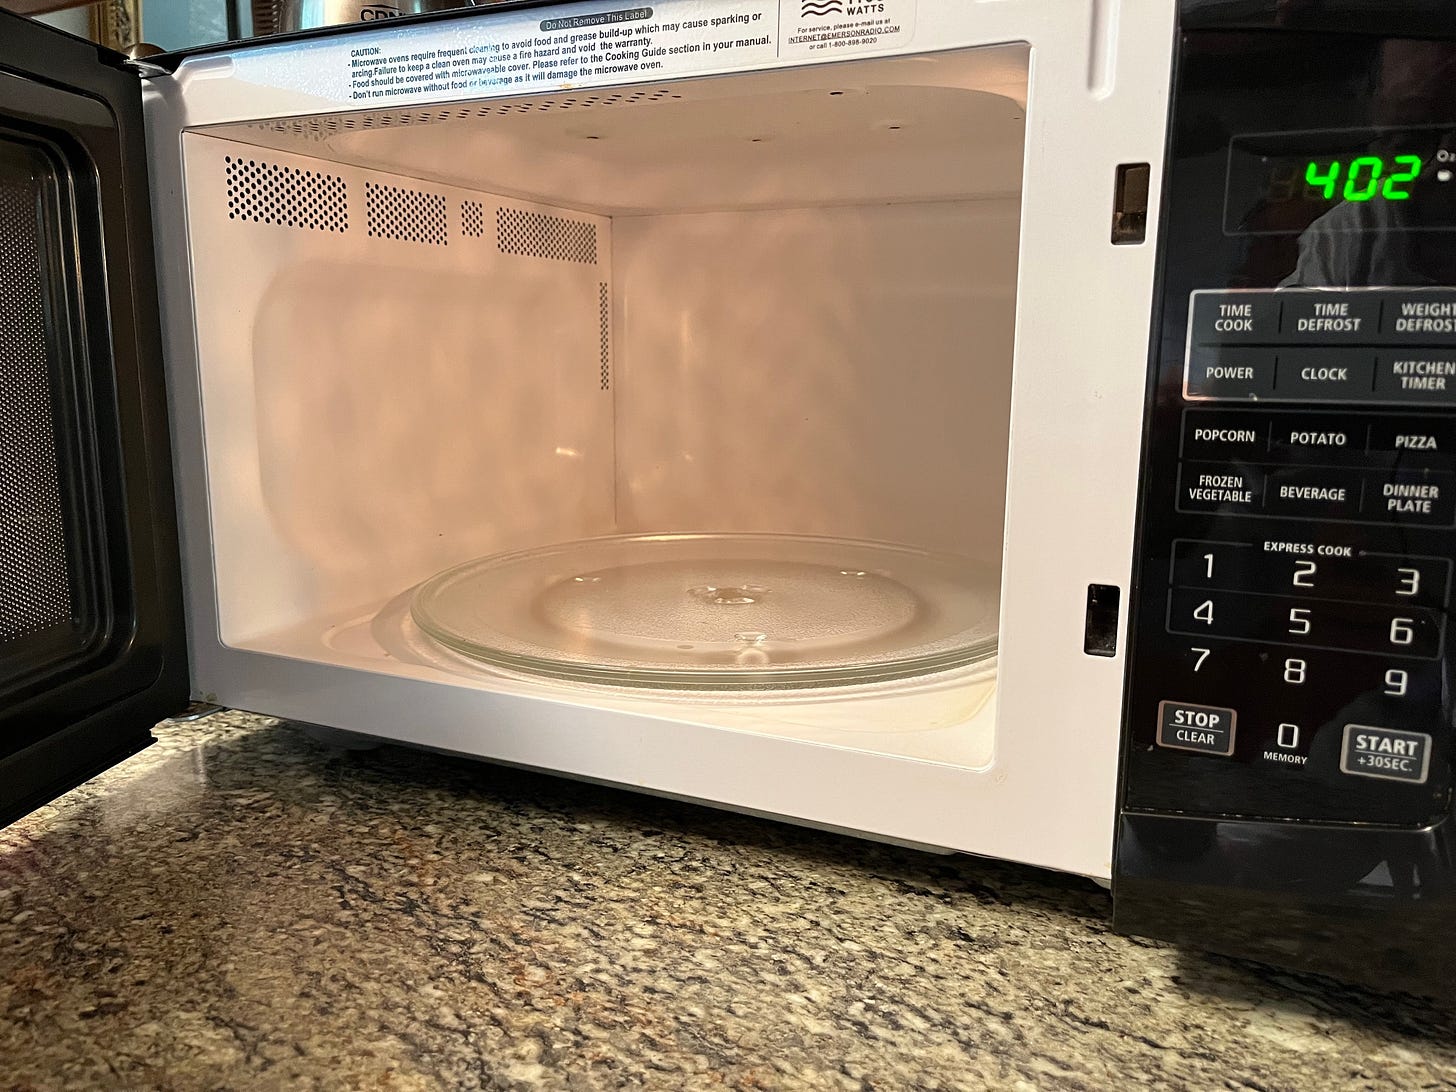 A microwave with a glass door

Description automatically generated